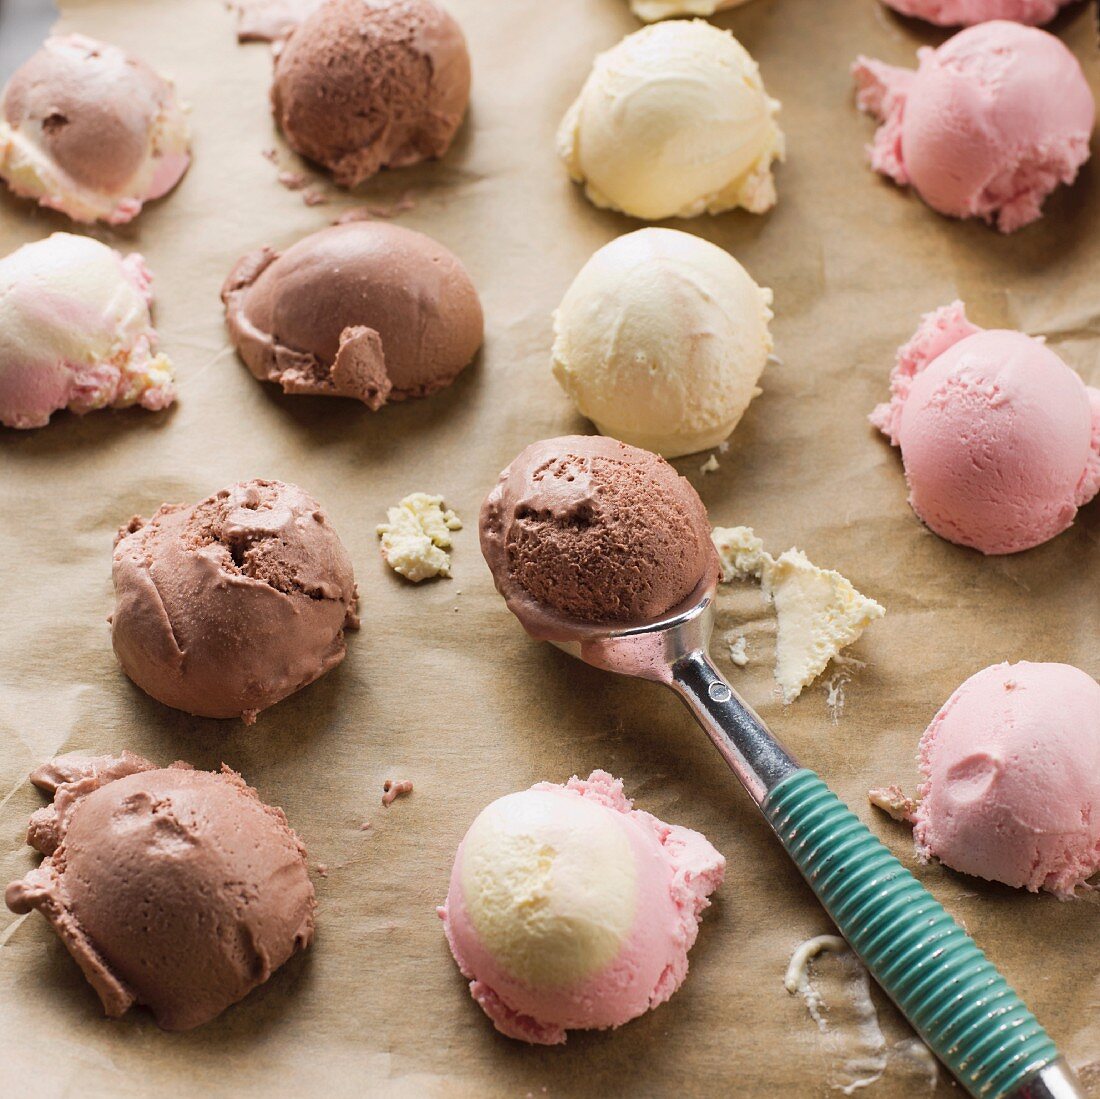 Various ice cream scoops on baking paper with an ice cream scoop